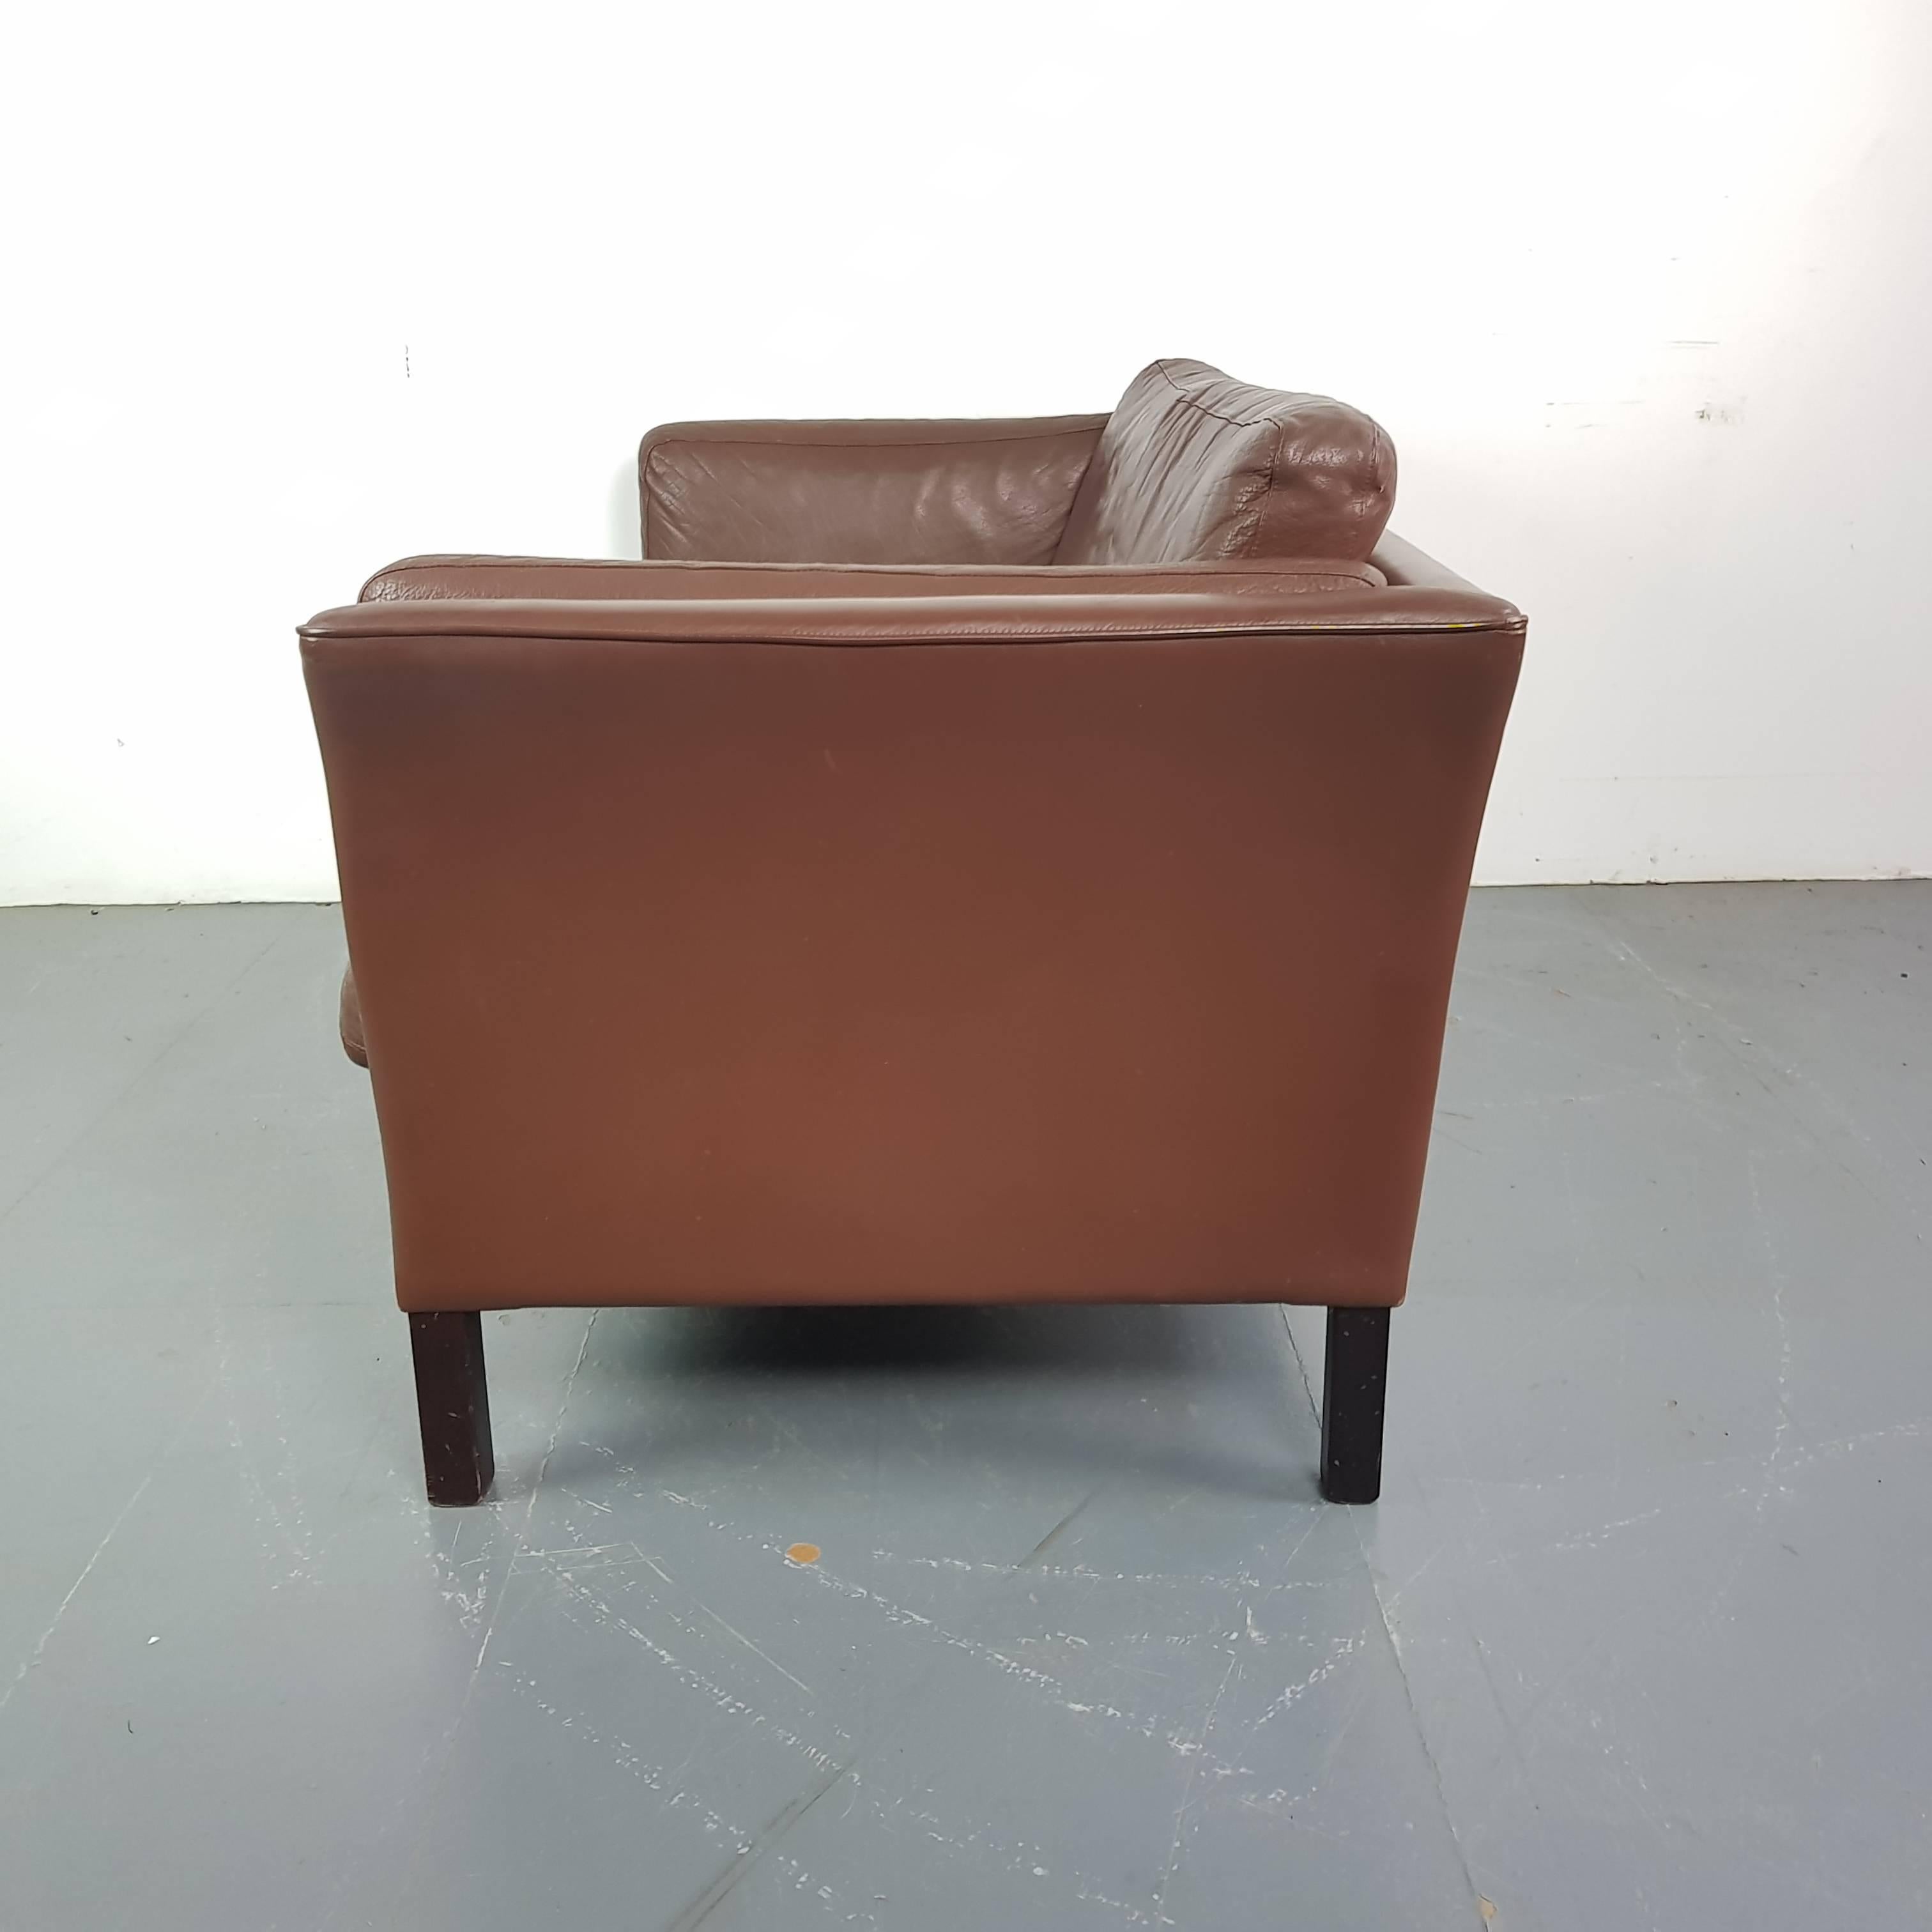 20th Century 1970s Chestnut Brown Leather Mogensen Style Two-Seat Sofa For Sale